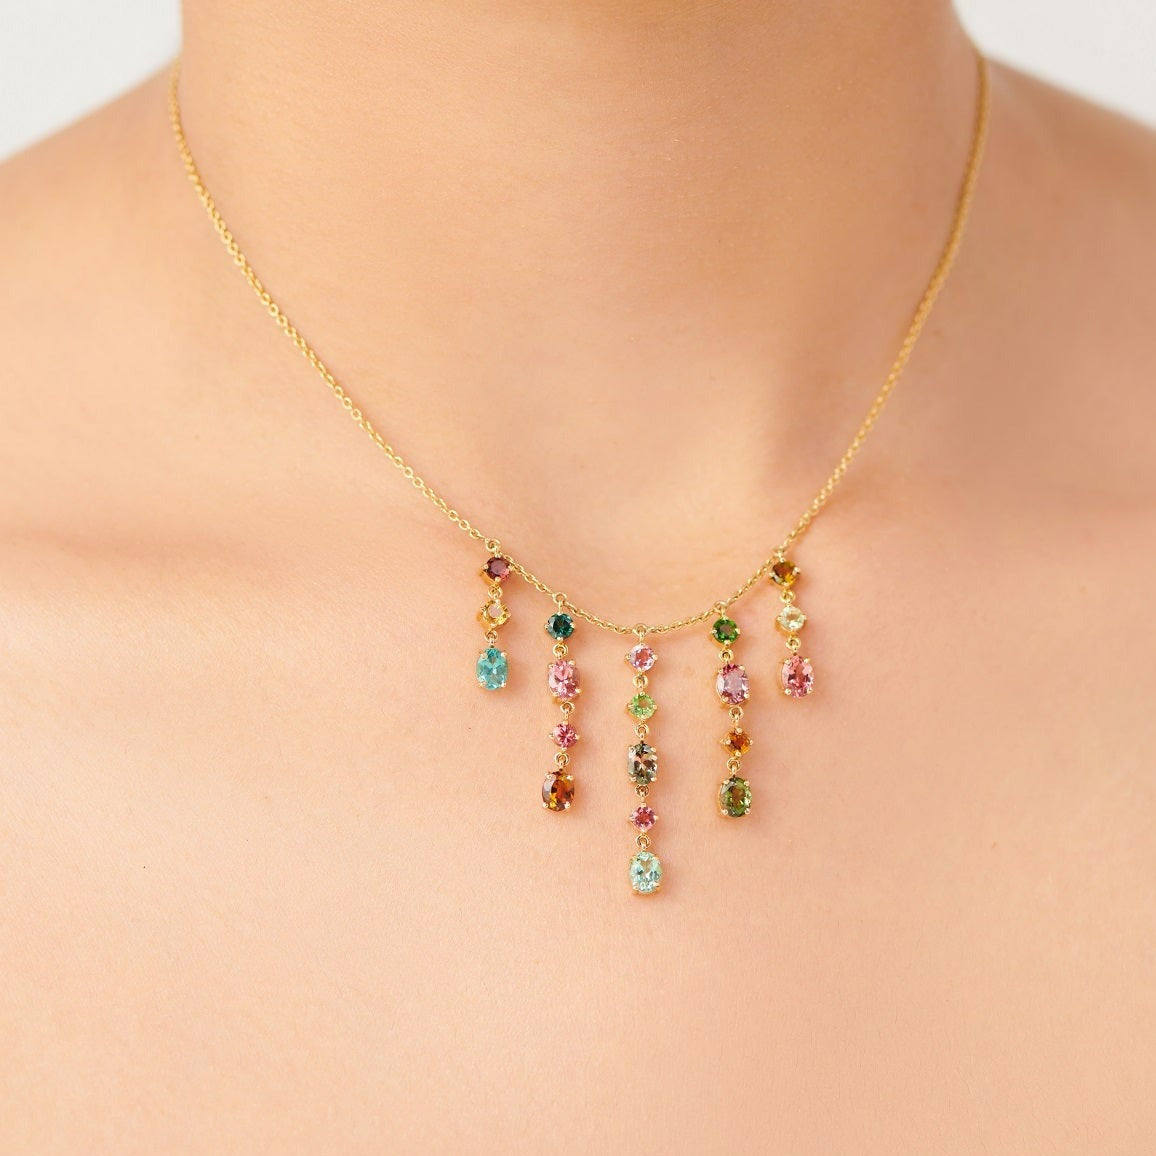 THE LINE Waterfall Necklace with Tourmalines